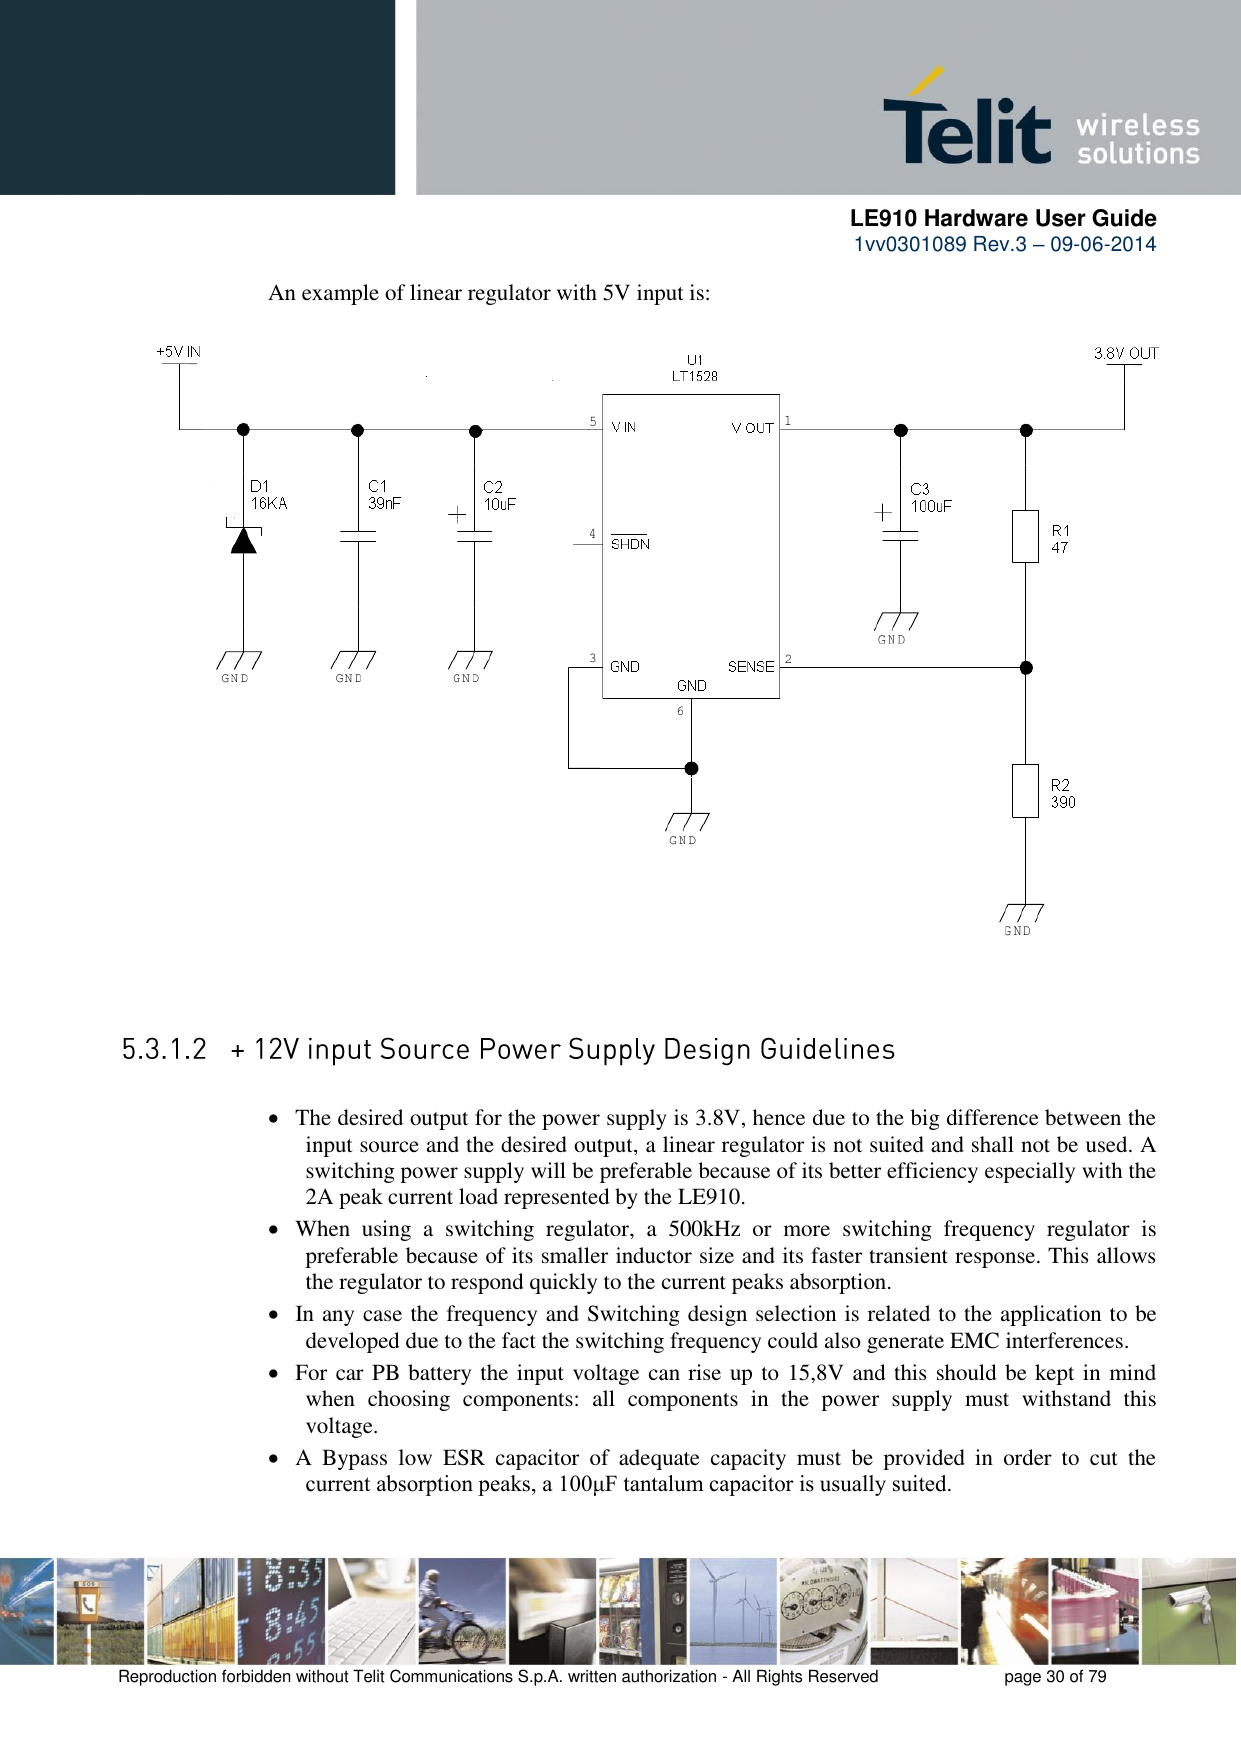      LE910 Hardware User Guide 1vv0301089 Rev.3 – 09-06-2014    Reproduction forbidden without Telit Communications S.p.A. written authorization - All Rights Reserved    page 30 of 79  An example of linear regulator with 5V input is:   The desired output for the power supply is 3.8V, hence due to the big difference between the input source and the desired output, a linear regulator is not suited and shall not be used. A switching power supply will be preferable because of its better efficiency especially with the 2A peak current load represented by the LE910.  When  using  a  switching  regulator,  a  500kHz  or  more  switching  frequency  regulator  is preferable because of its smaller inductor size and its faster transient response. This allows the regulator to respond quickly to the current peaks absorption.   In any case the frequency and Switching design selection is related to the application to be developed due to the fact the switching frequency could also generate EMC interferences.  For car PB battery the input voltage can rise up to 15,8V and this should be kept in mind when  choosing  components:  all  components  in  the  power  supply  must  withstand  this voltage.  A  Bypass  low  ESR  capacitor  of  adequate  capacity  must  be  provided  in  order  to  cut  the current absorption peaks, a 100μF tantalum capacitor is usually suited. 